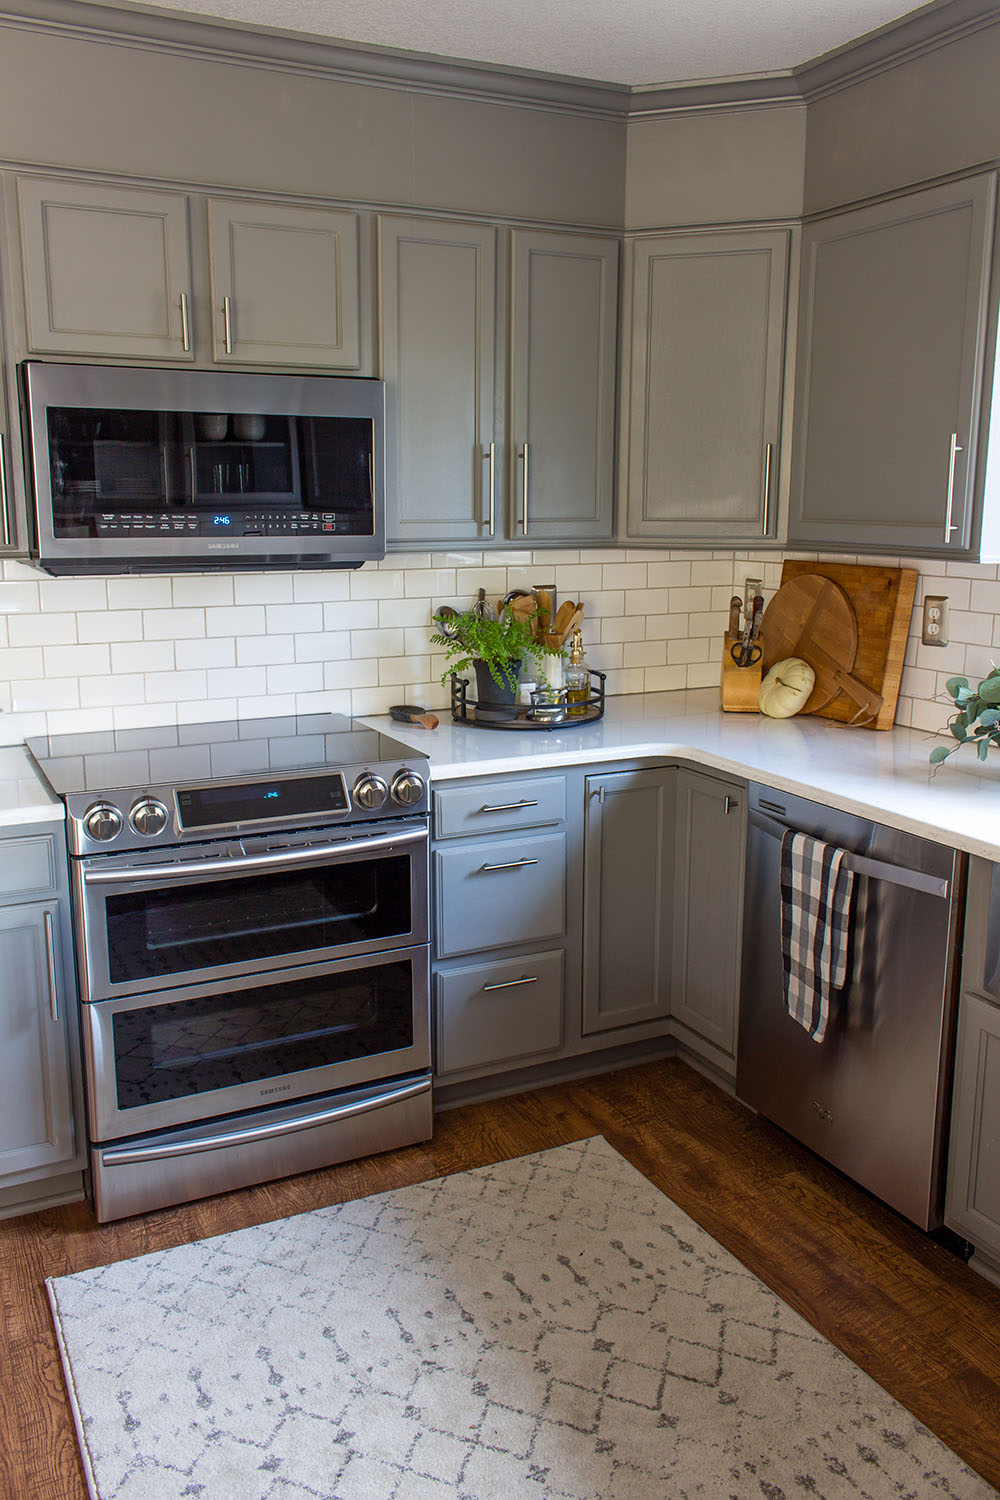 The corner of a kitchen with a new stainless steel microwave and double oven range.